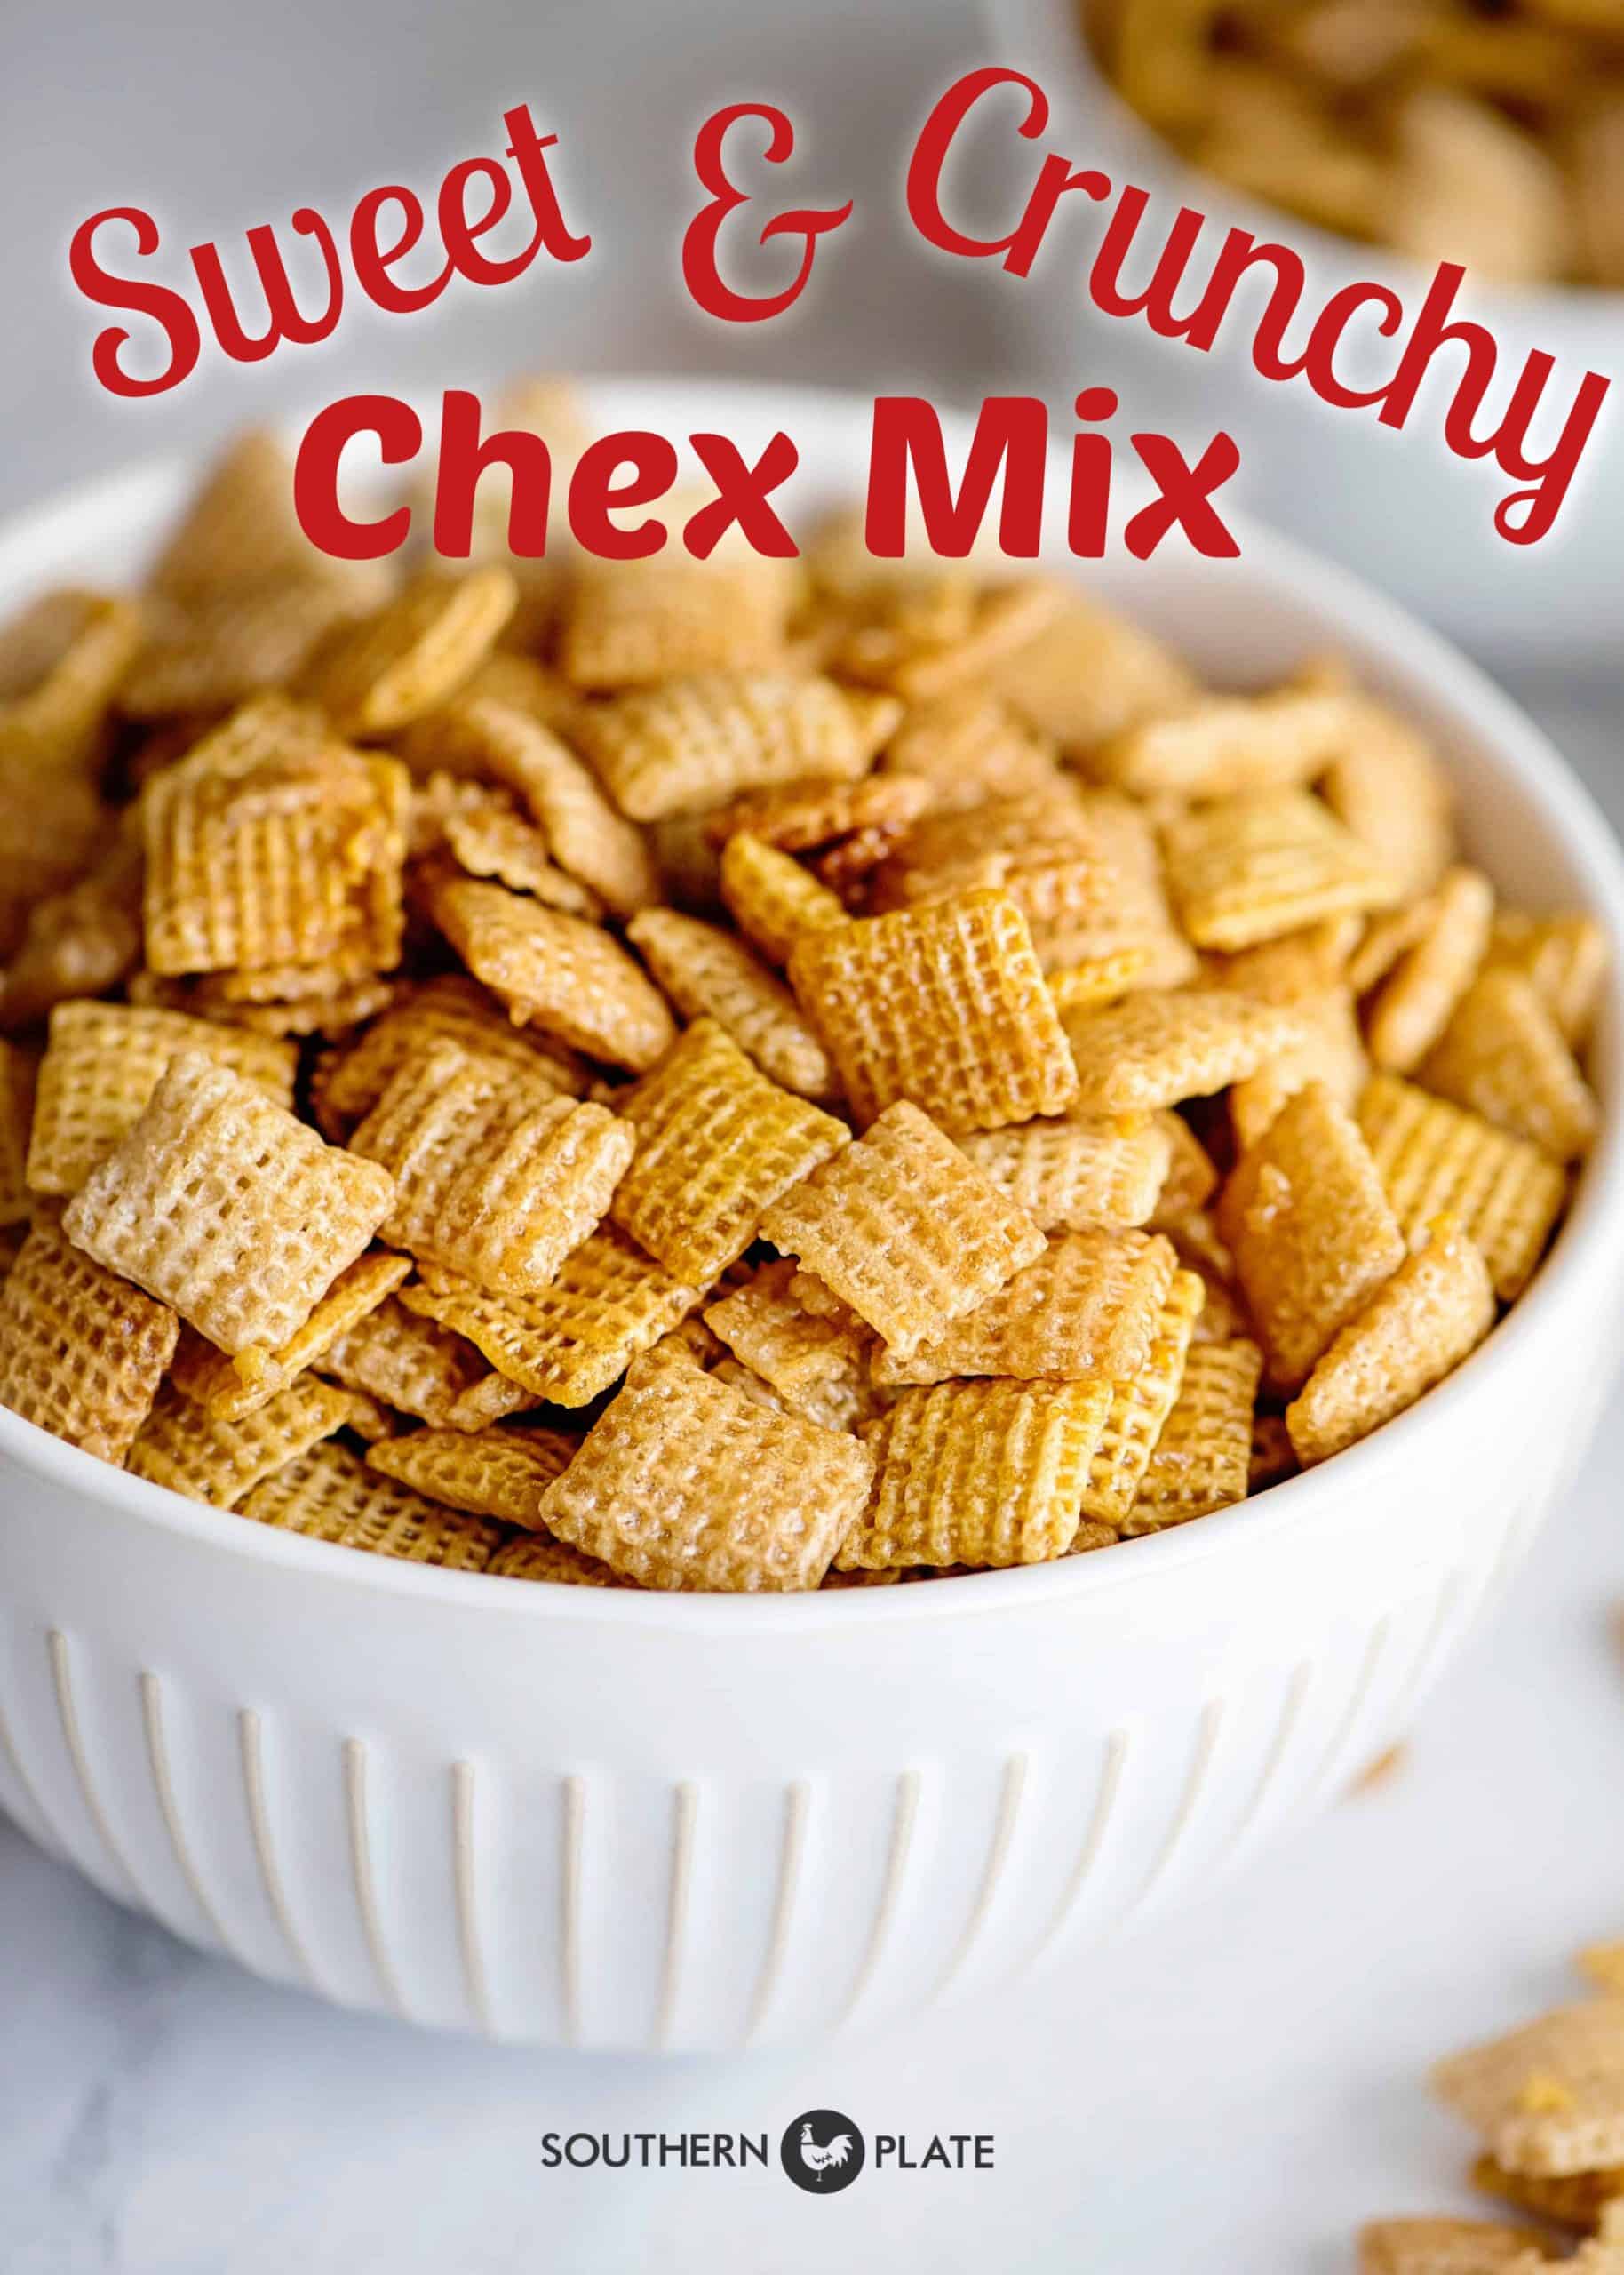 chex Mix